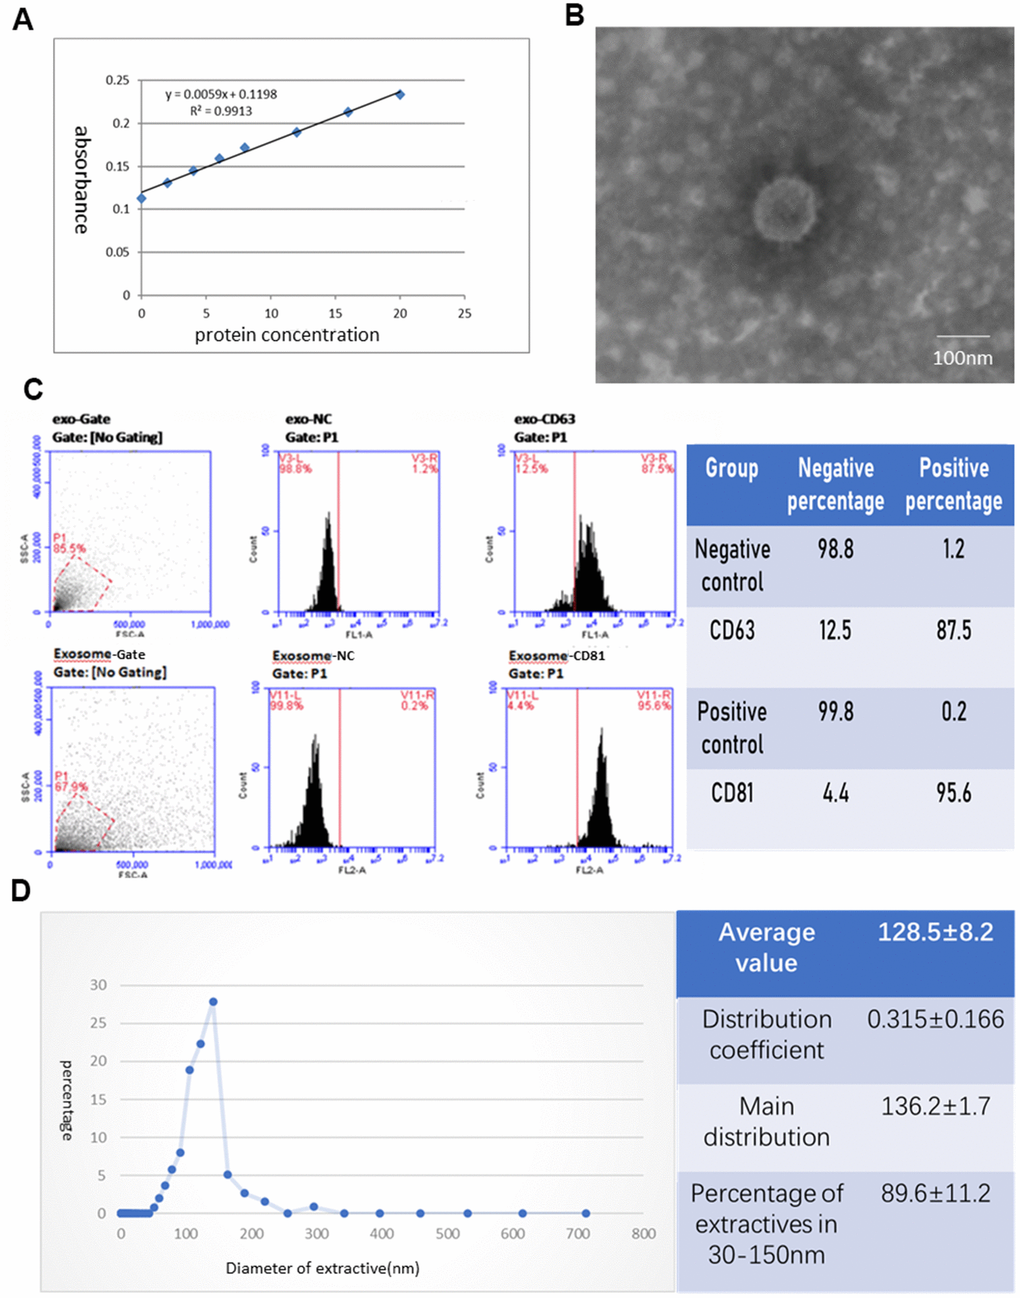 Identification of exosomes deprived from hAECs. (A) Protein concentration curve from the BCA test. (B) The morphology of exosomes was observed under an electron microscope. (C) The phenotype of exosomes for CD63 and CD81 was identified by flow cytometry. (D) The diameter distribution of exosomes was measured by nanoparticle tracking analysis.